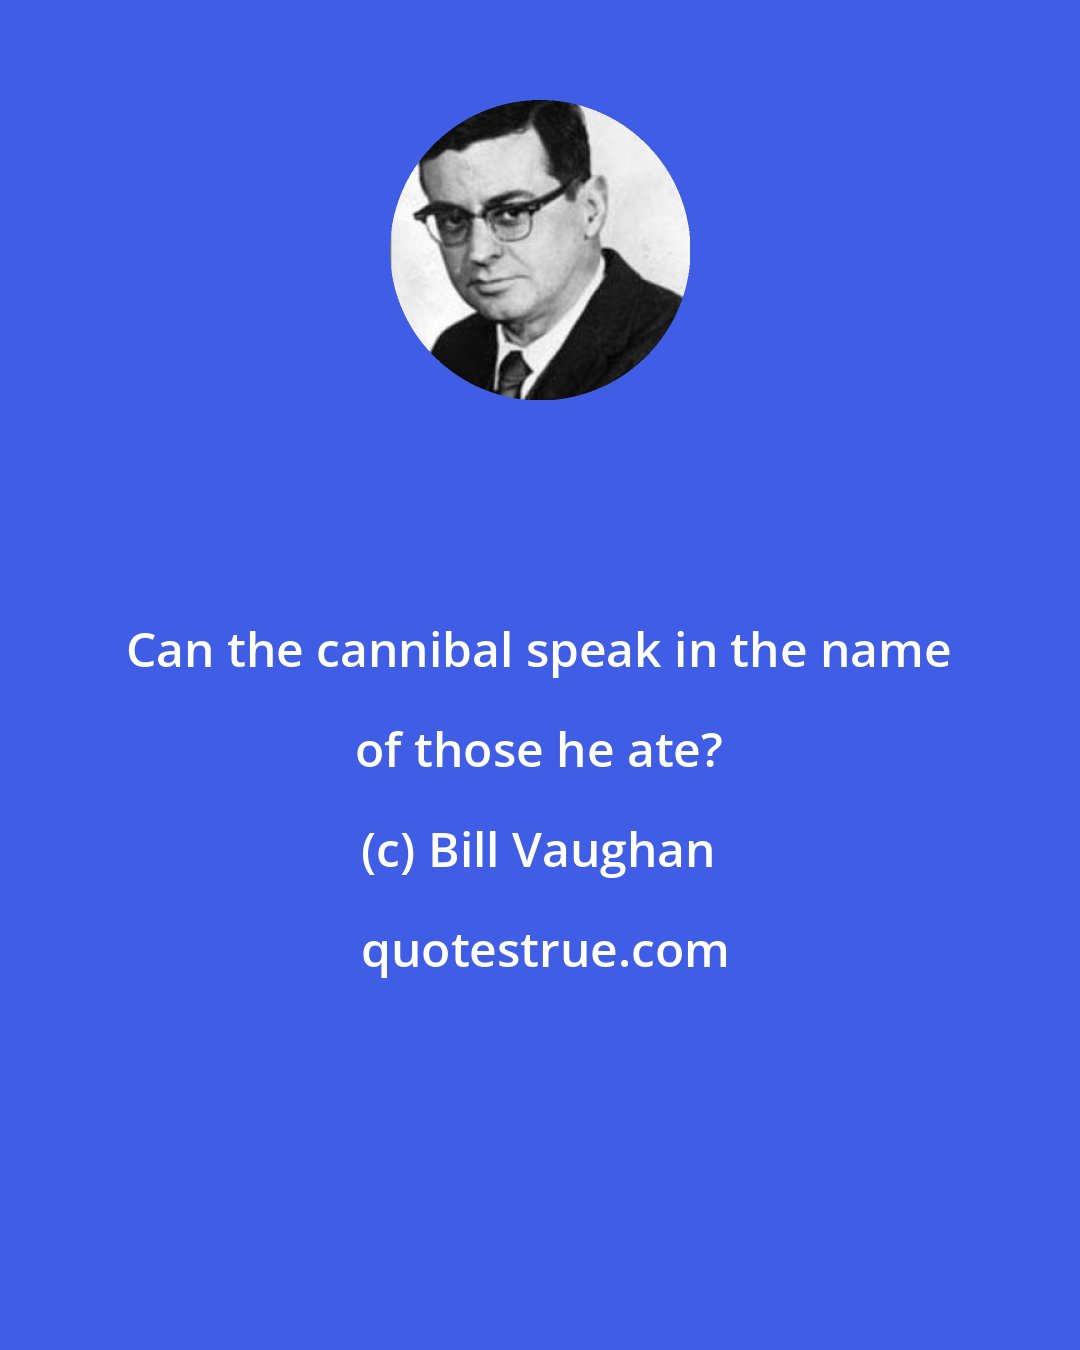 Bill Vaughan: Can the cannibal speak in the name of those he ate?